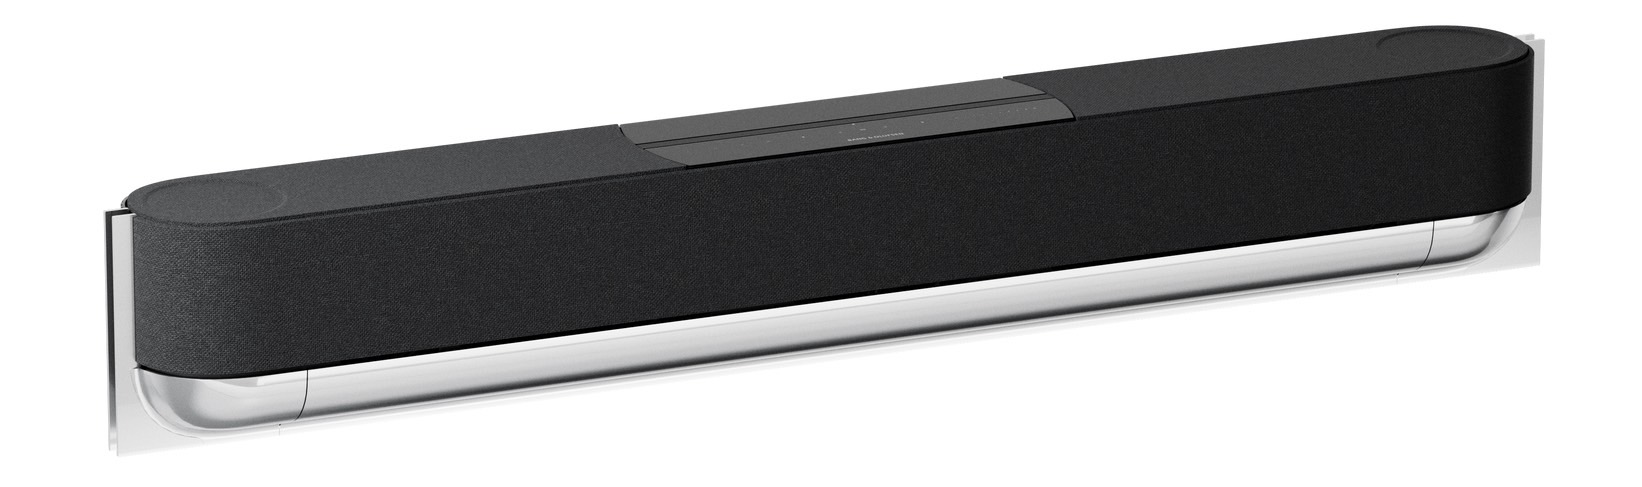 Bang & Olufsen's new Dolby Atmos soundbar is designed to outlive your TV  and maybe even you